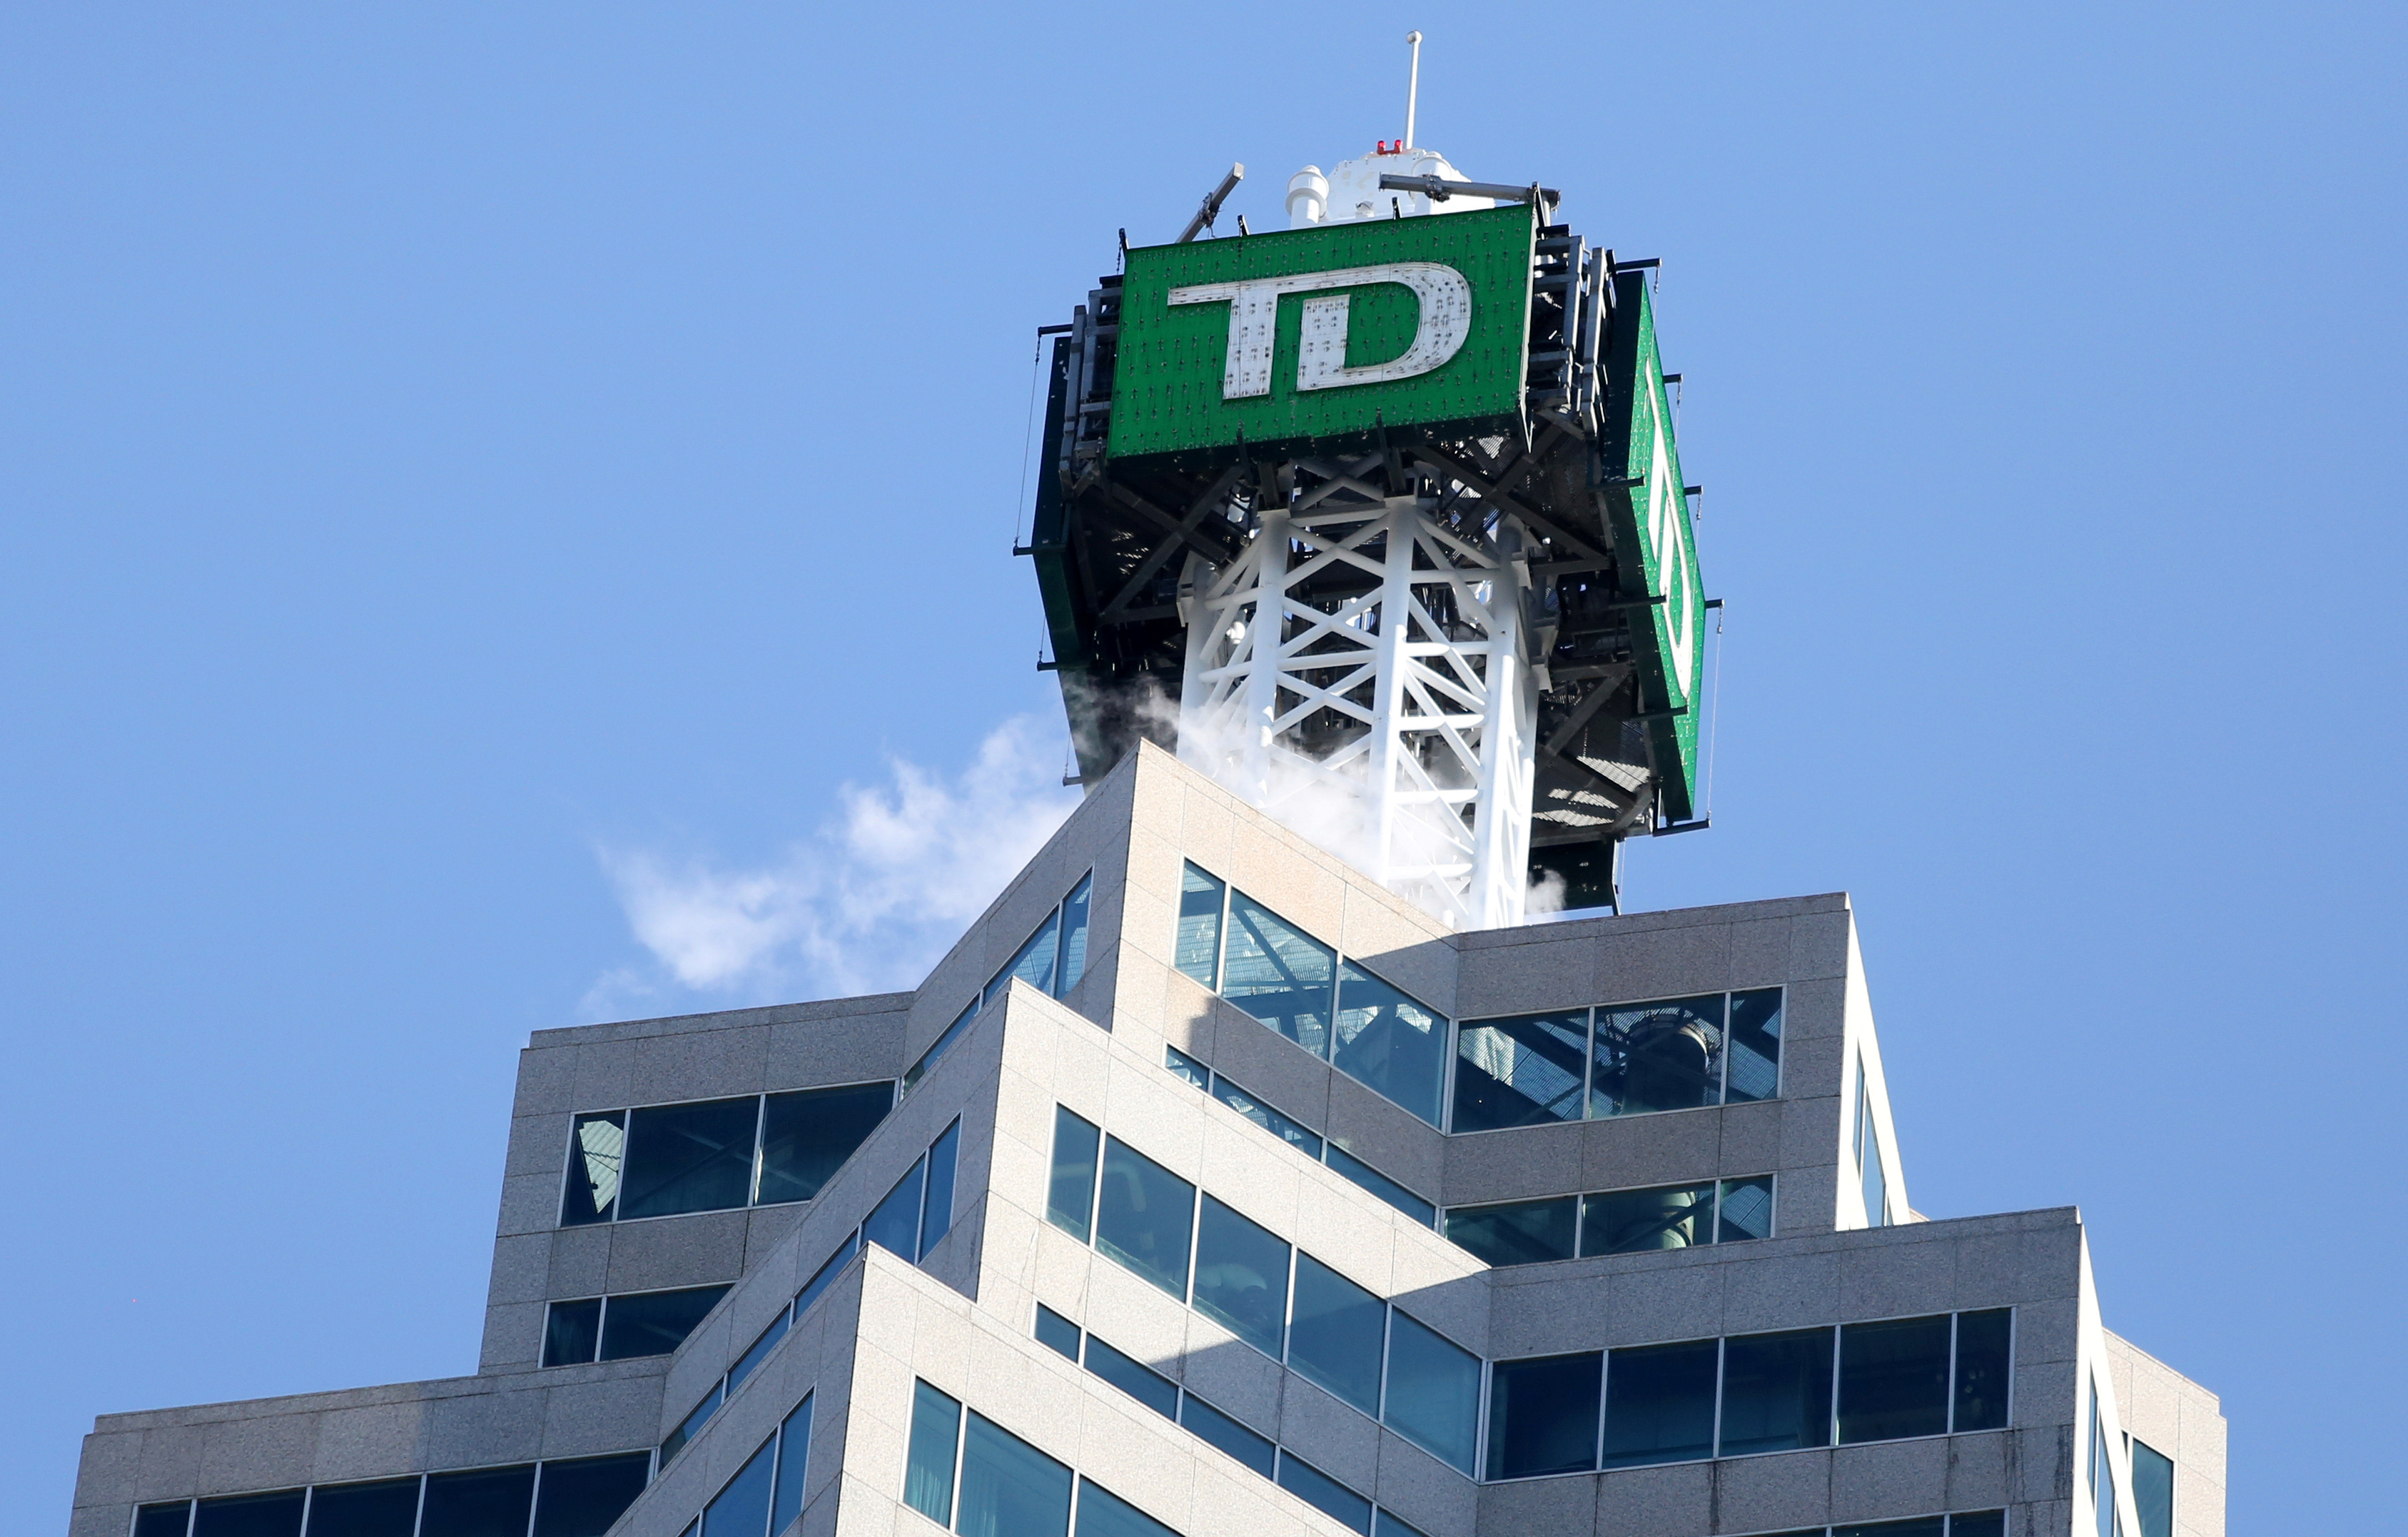 The TD bank logo is seen on top of the Toronto Dominion Canada Trust Tower in Toronto